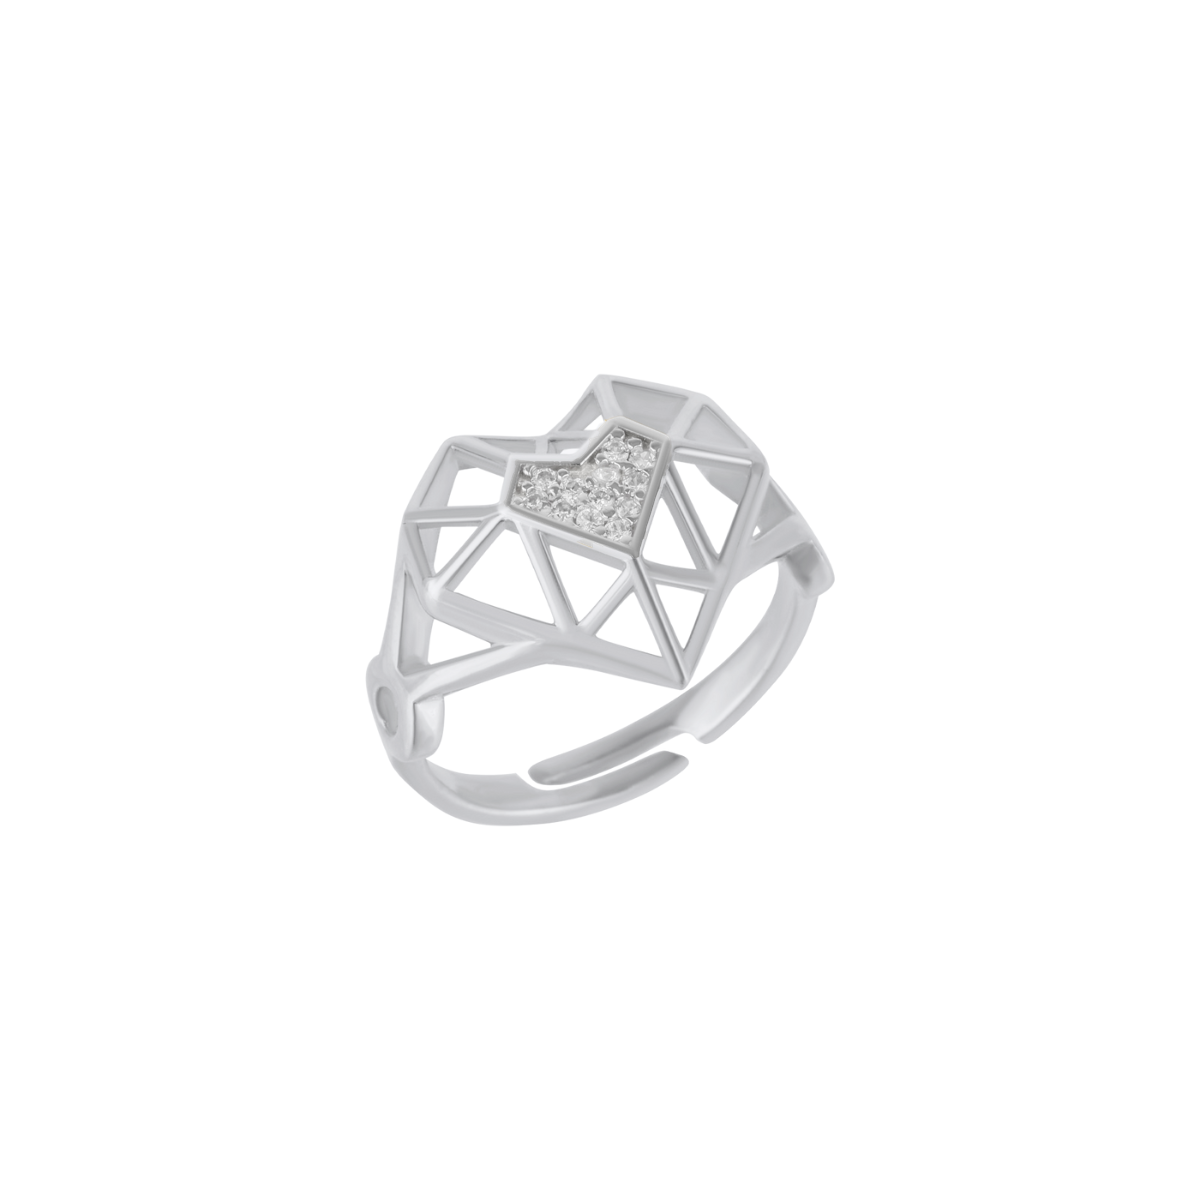 Geometric Heart Adjustable Ring in Sterling Silver